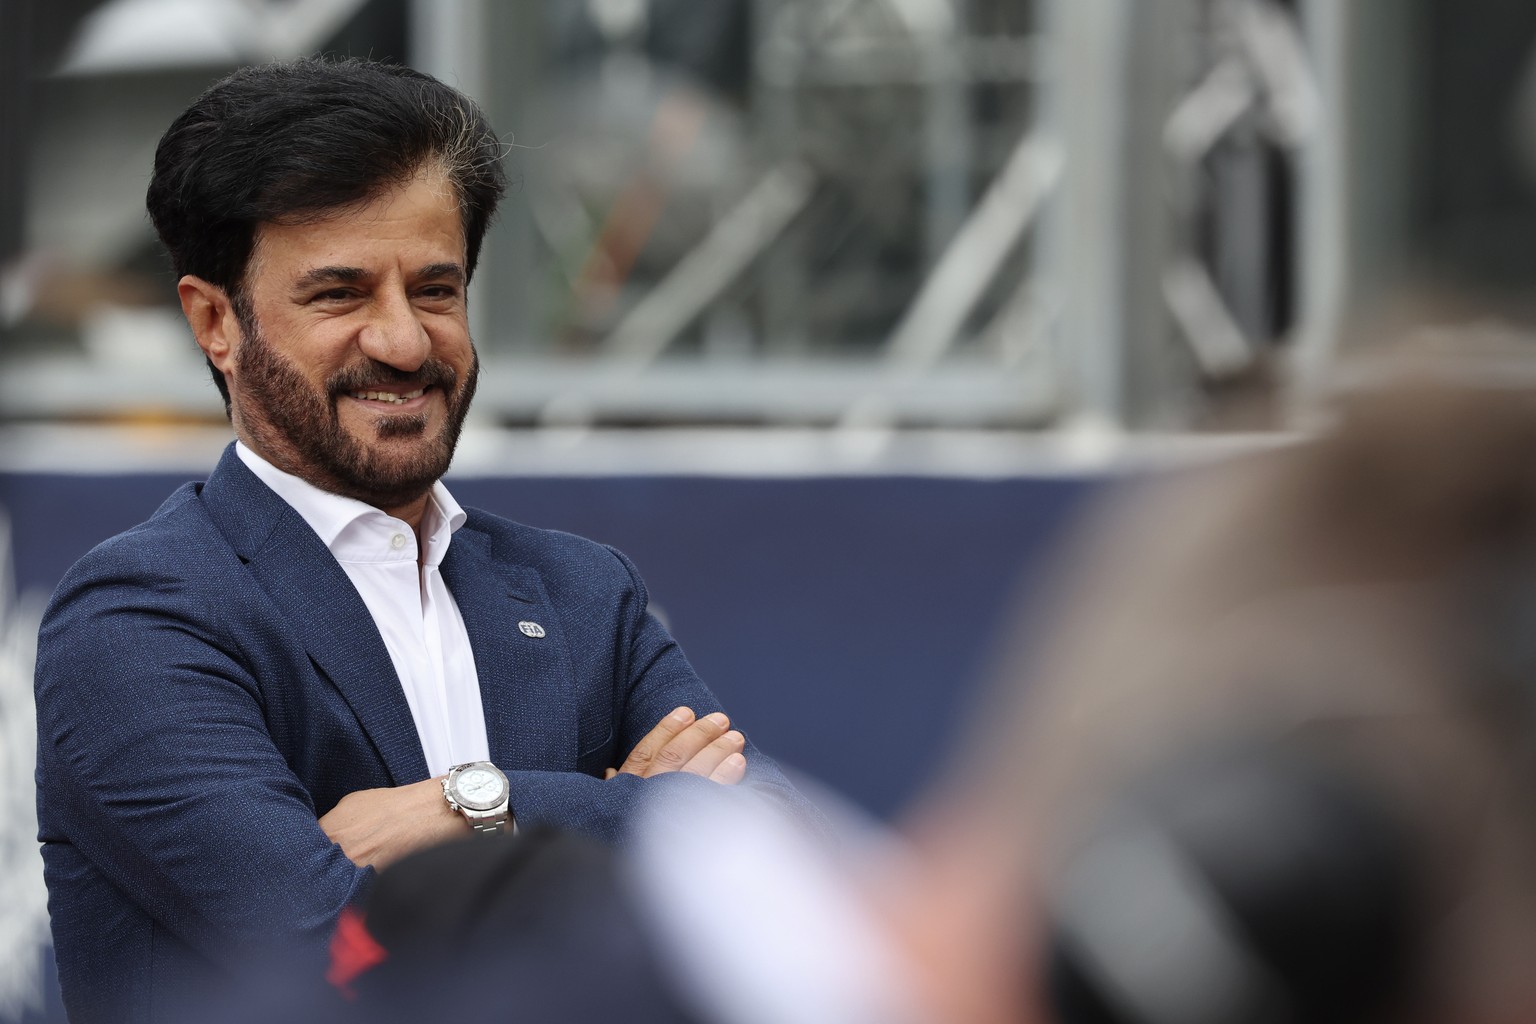 FIA President Mohammed Ben Sulayem during the Formula One Grand Prix at the Spa-Francorchamps racetrack in Spa, Belgium, Sunday, July 30, 2023. (AP Photo/Geert Vanden Wijngaert)